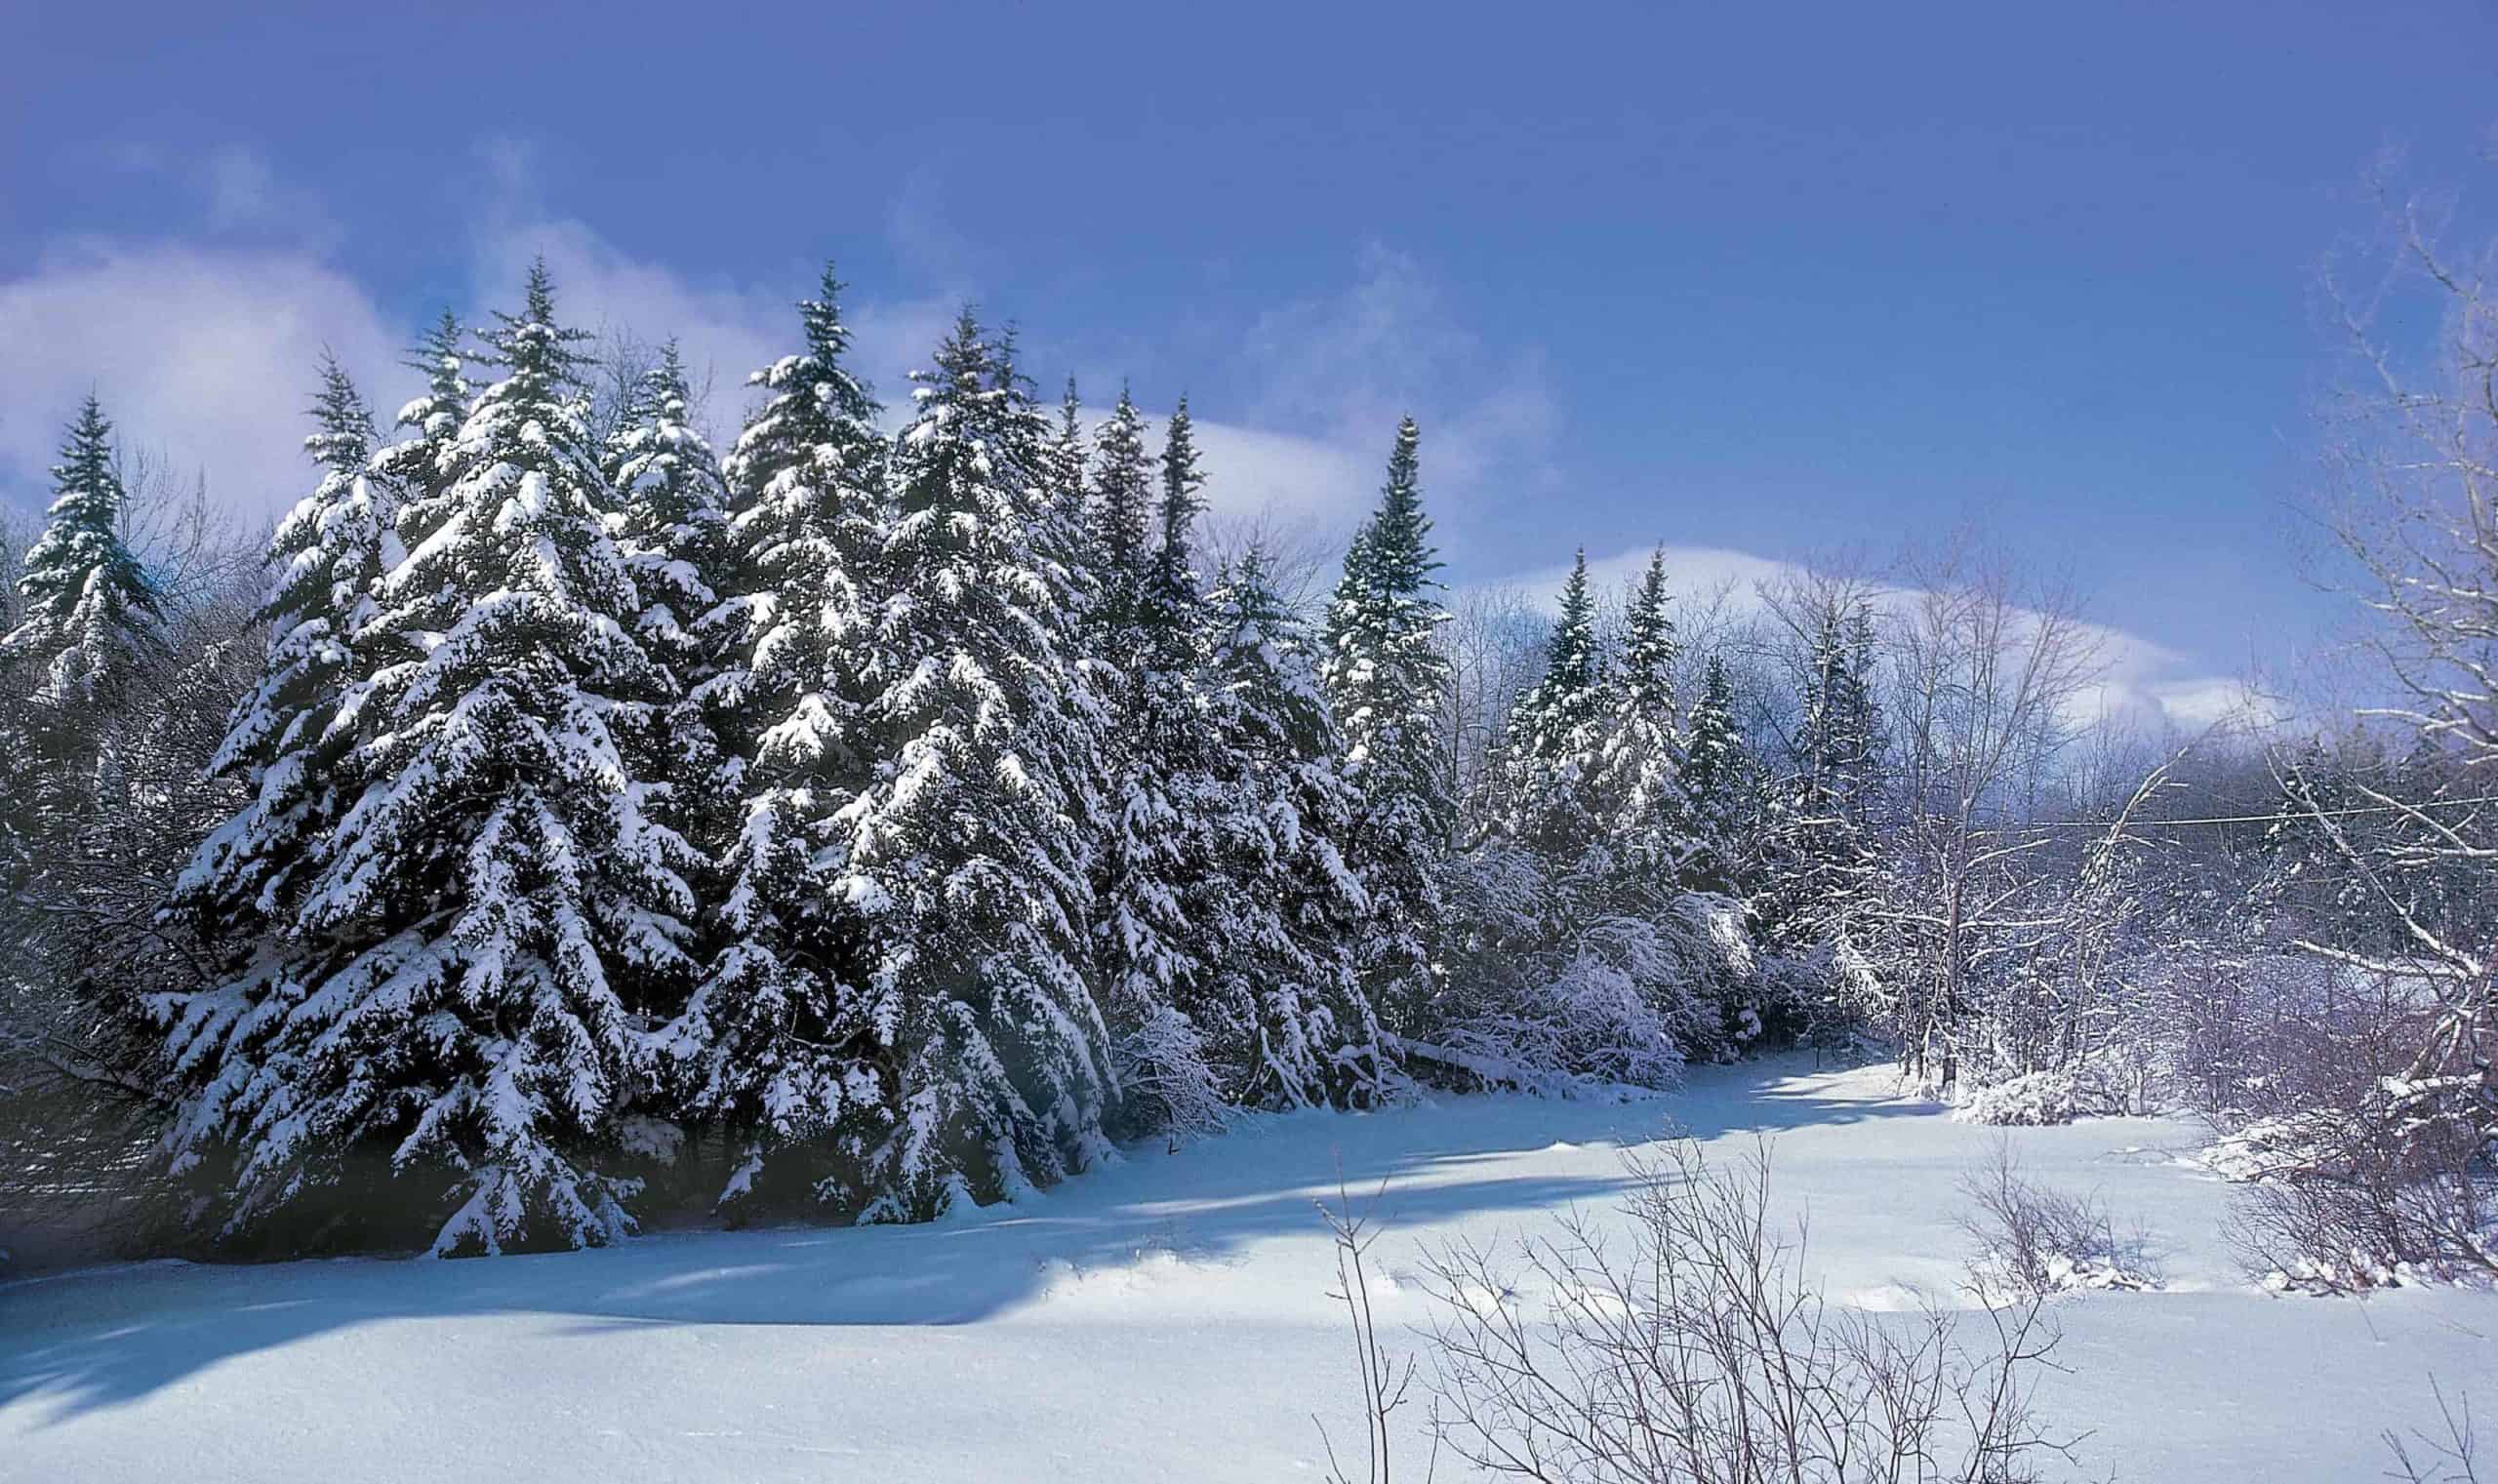 Notchview in Windsor grooms miles of trails for cross-country skiing and snowshoeing.